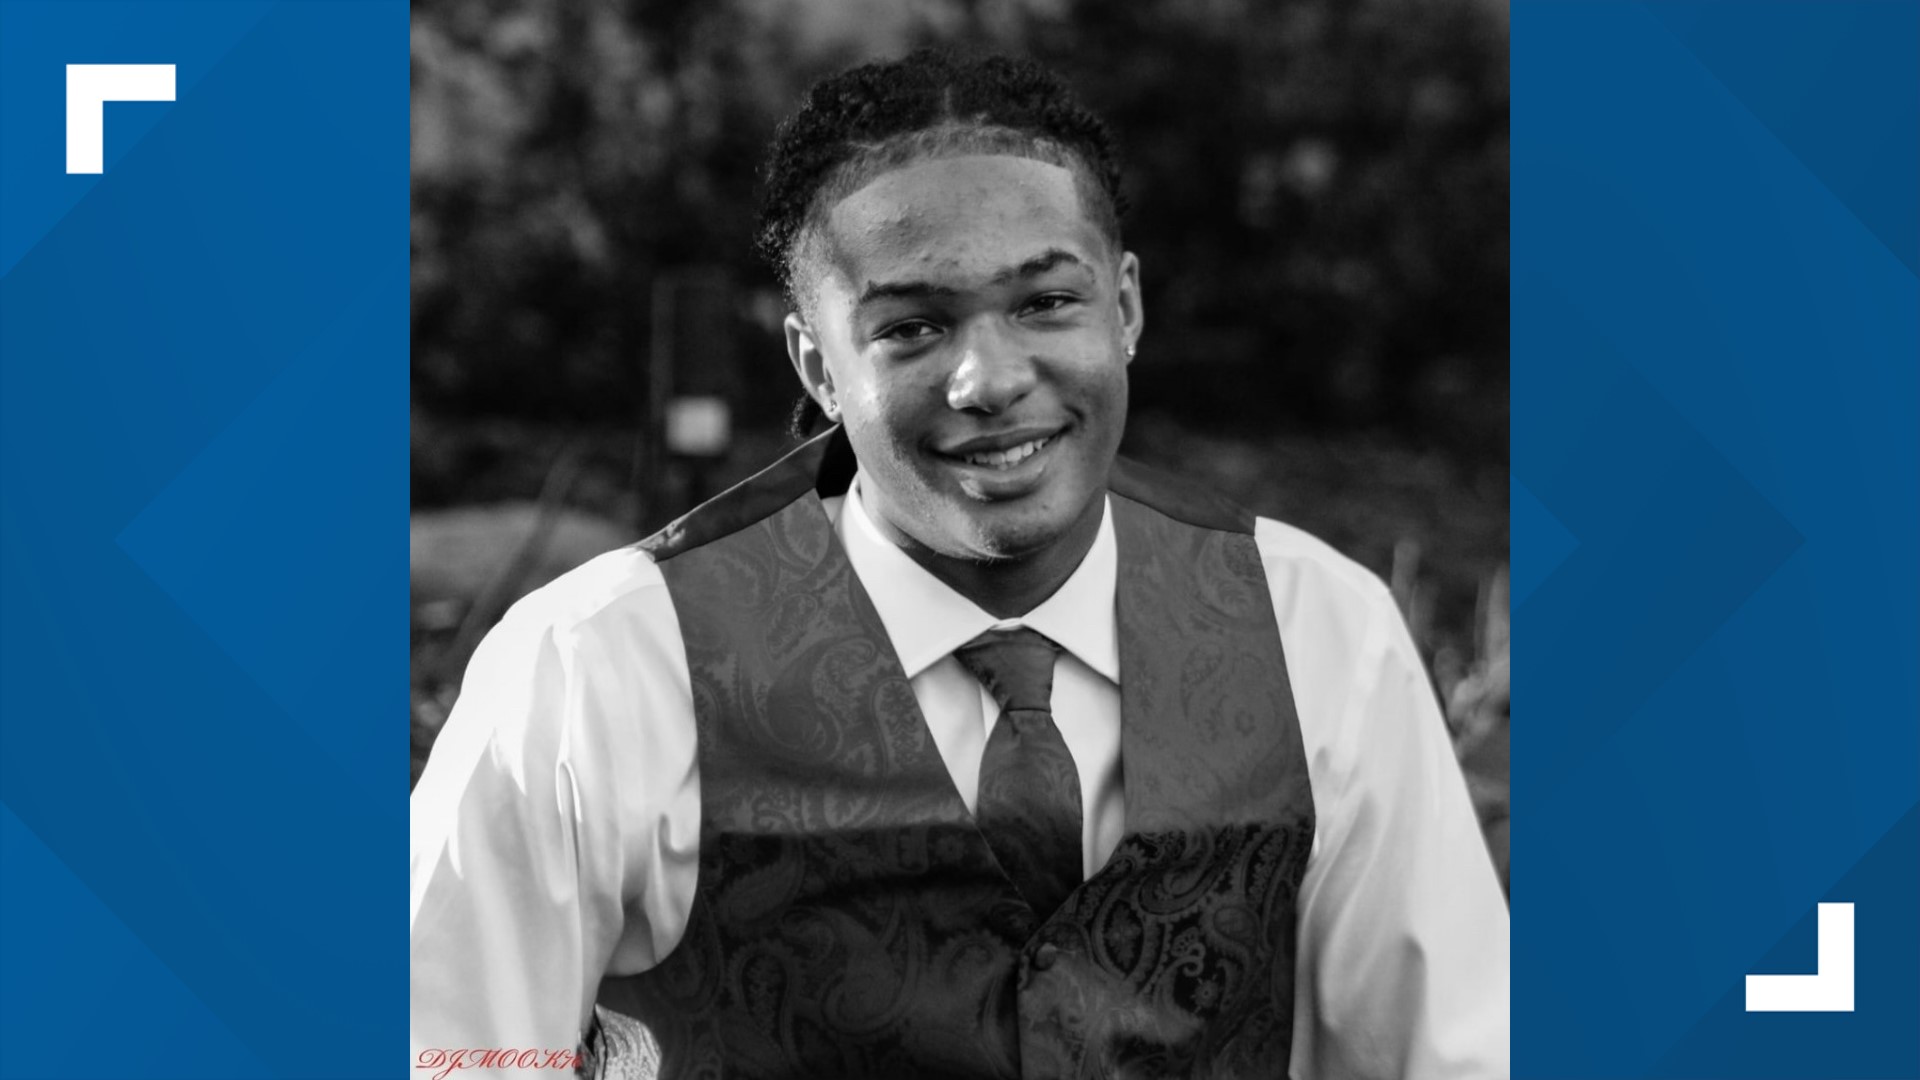 Christian Scott died Wednesday morning after being found at the bottom of a pool in Fairfield County on Sunday.